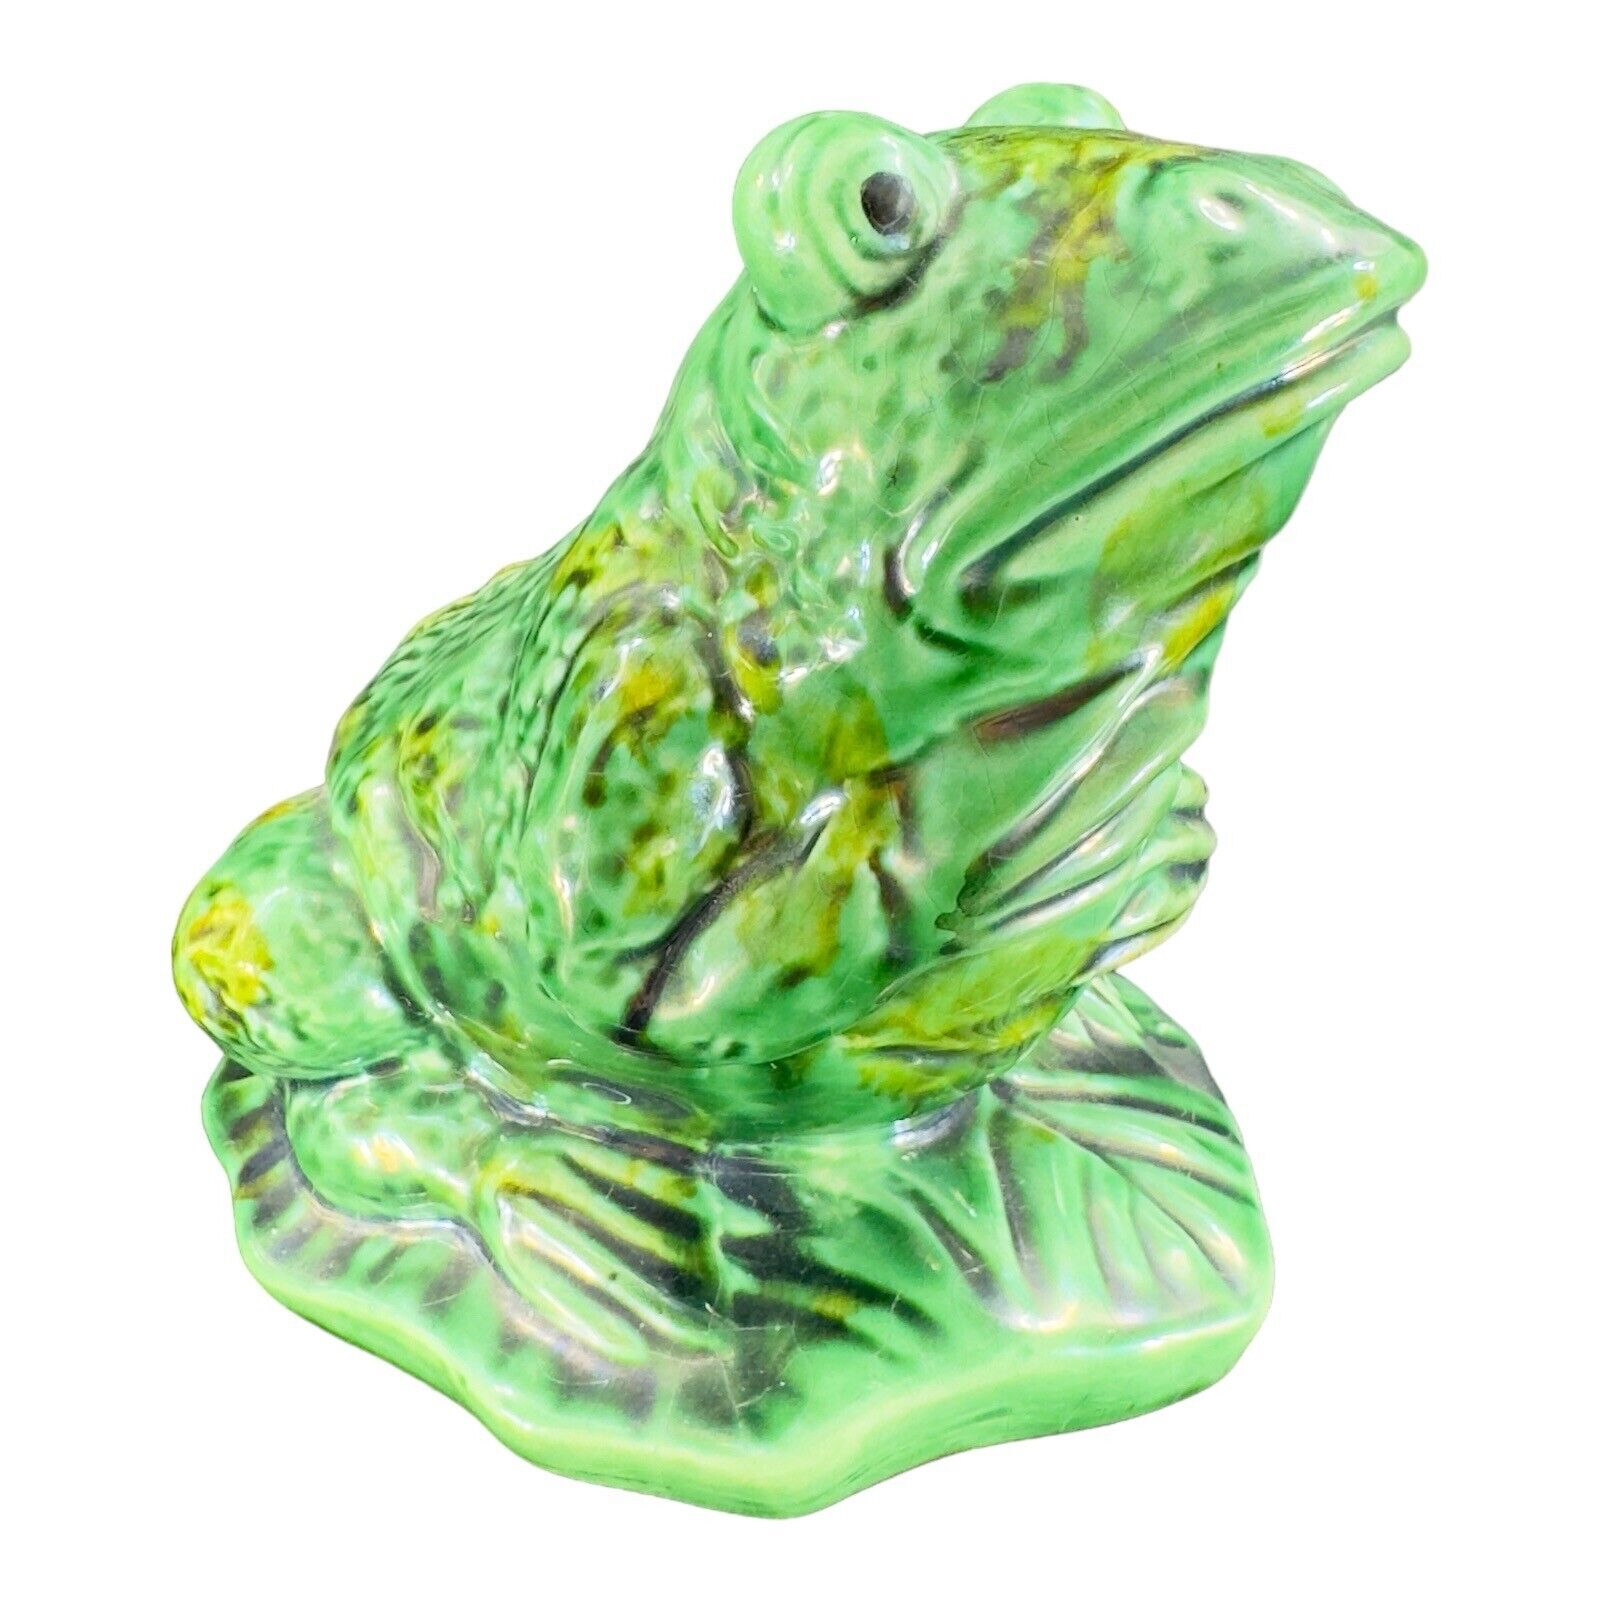 Antique Majolica Pottery Ceramic Frog Toad Large Figurine Green Glaze Whimsical